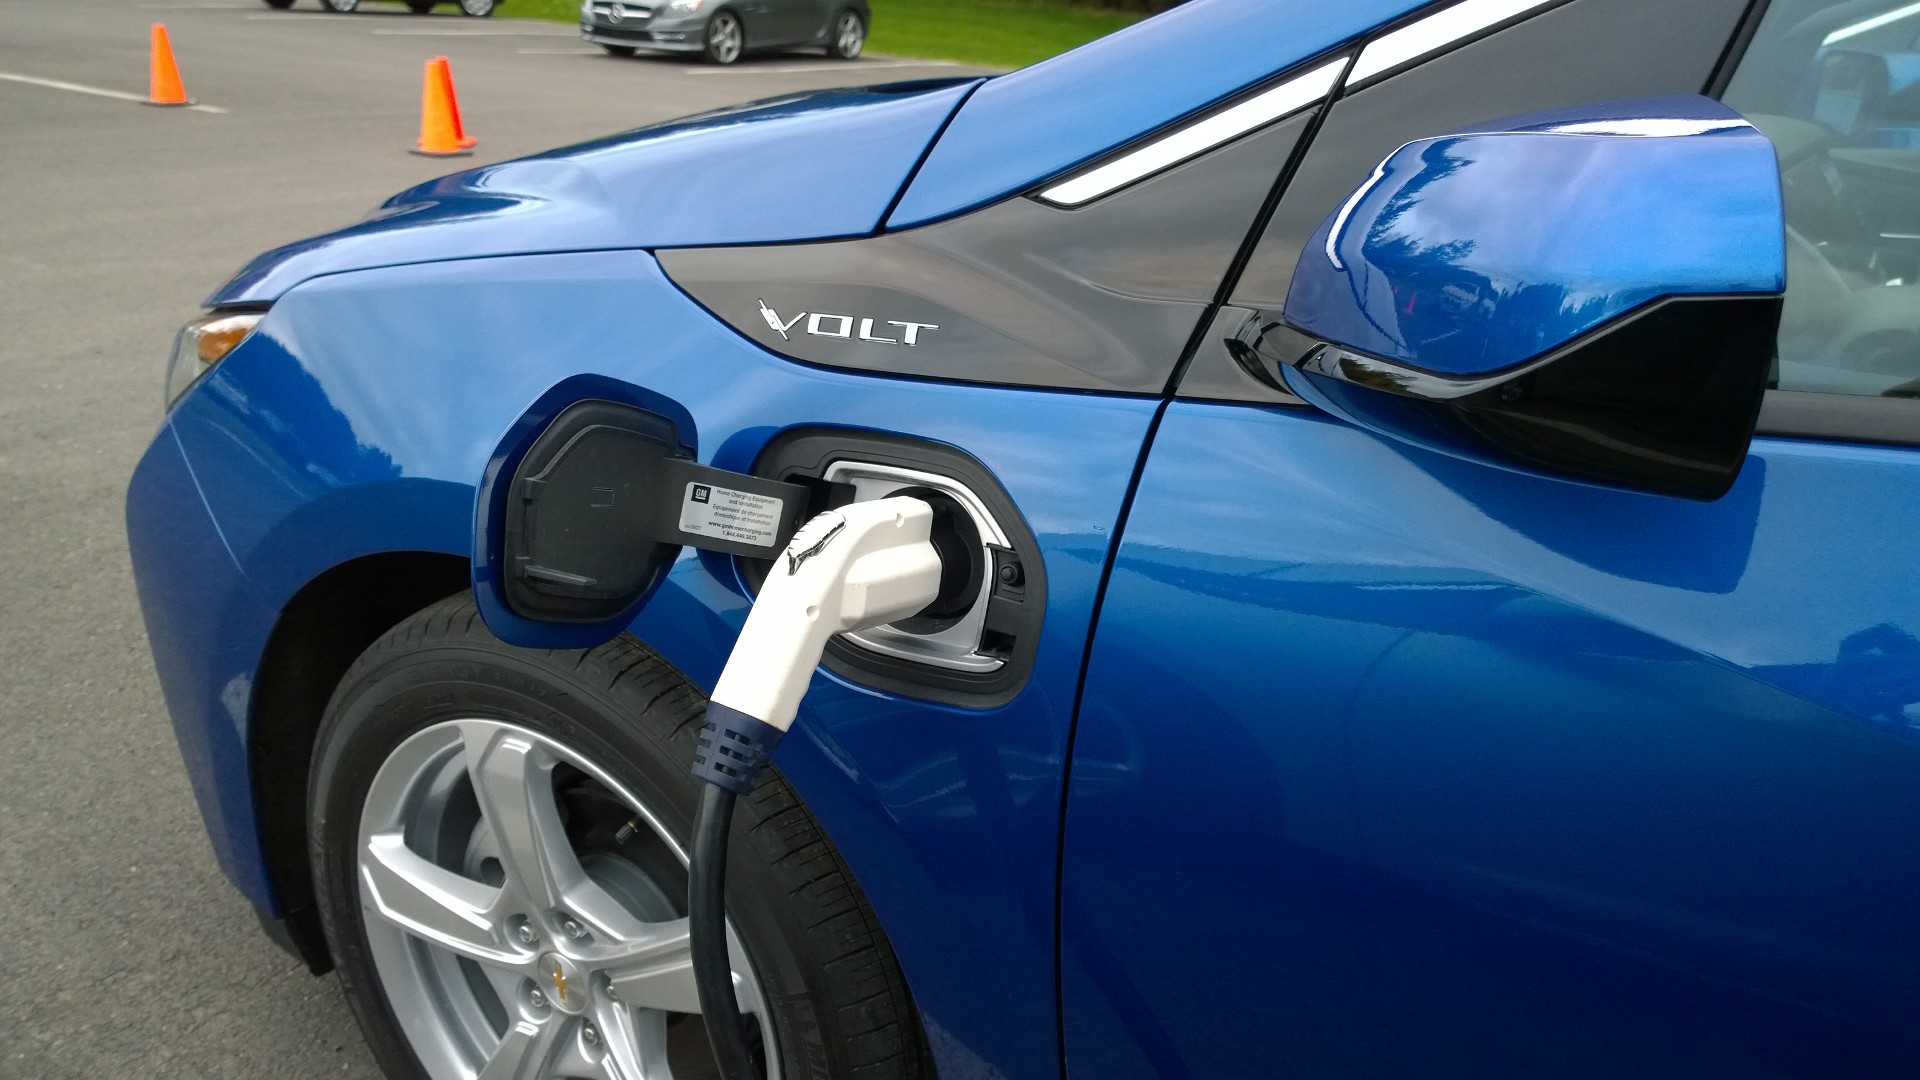 Review of the 2016 Chevy Volt EV (electric hybrid vehicle